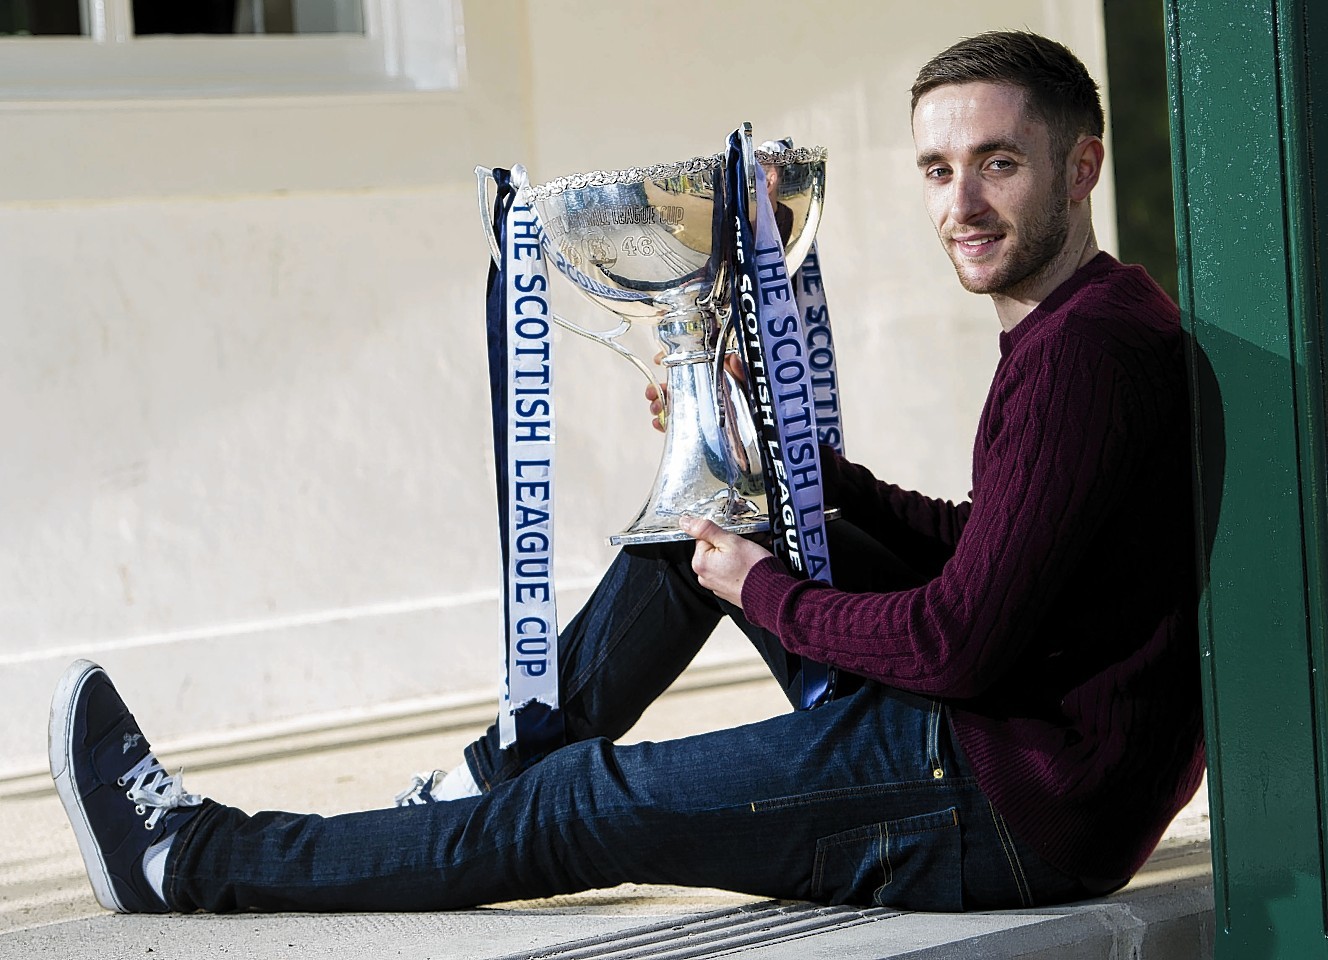 Nick Ross briefly got his hands on the League Cup last season, prior to the final